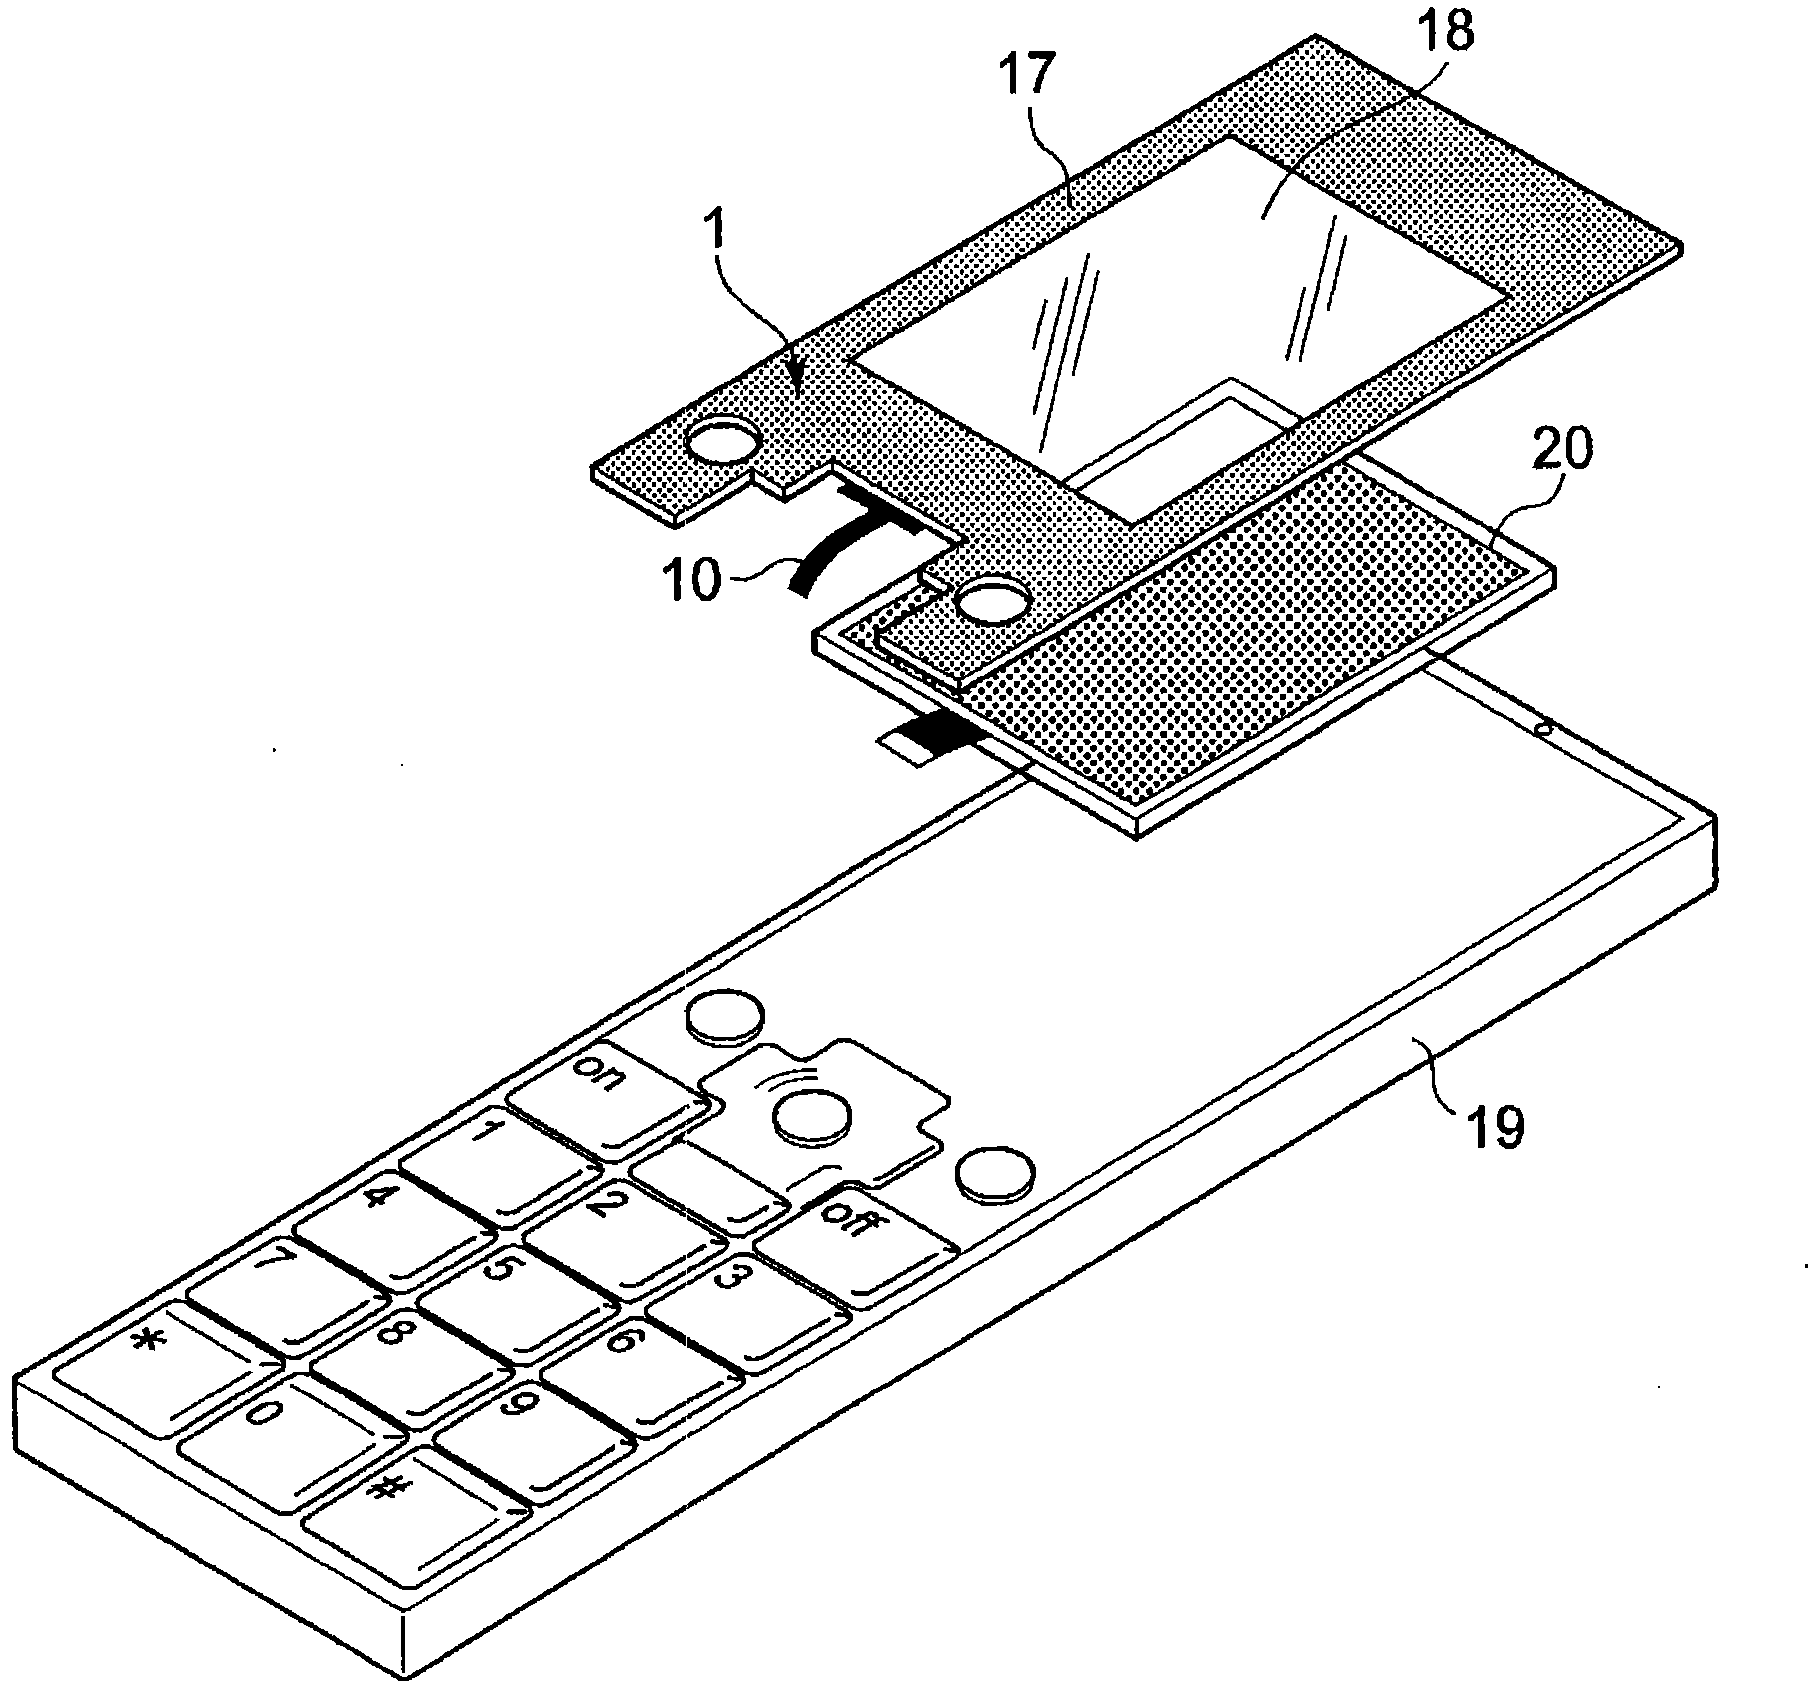 Protection panel provided with touch input function for electronic device display window